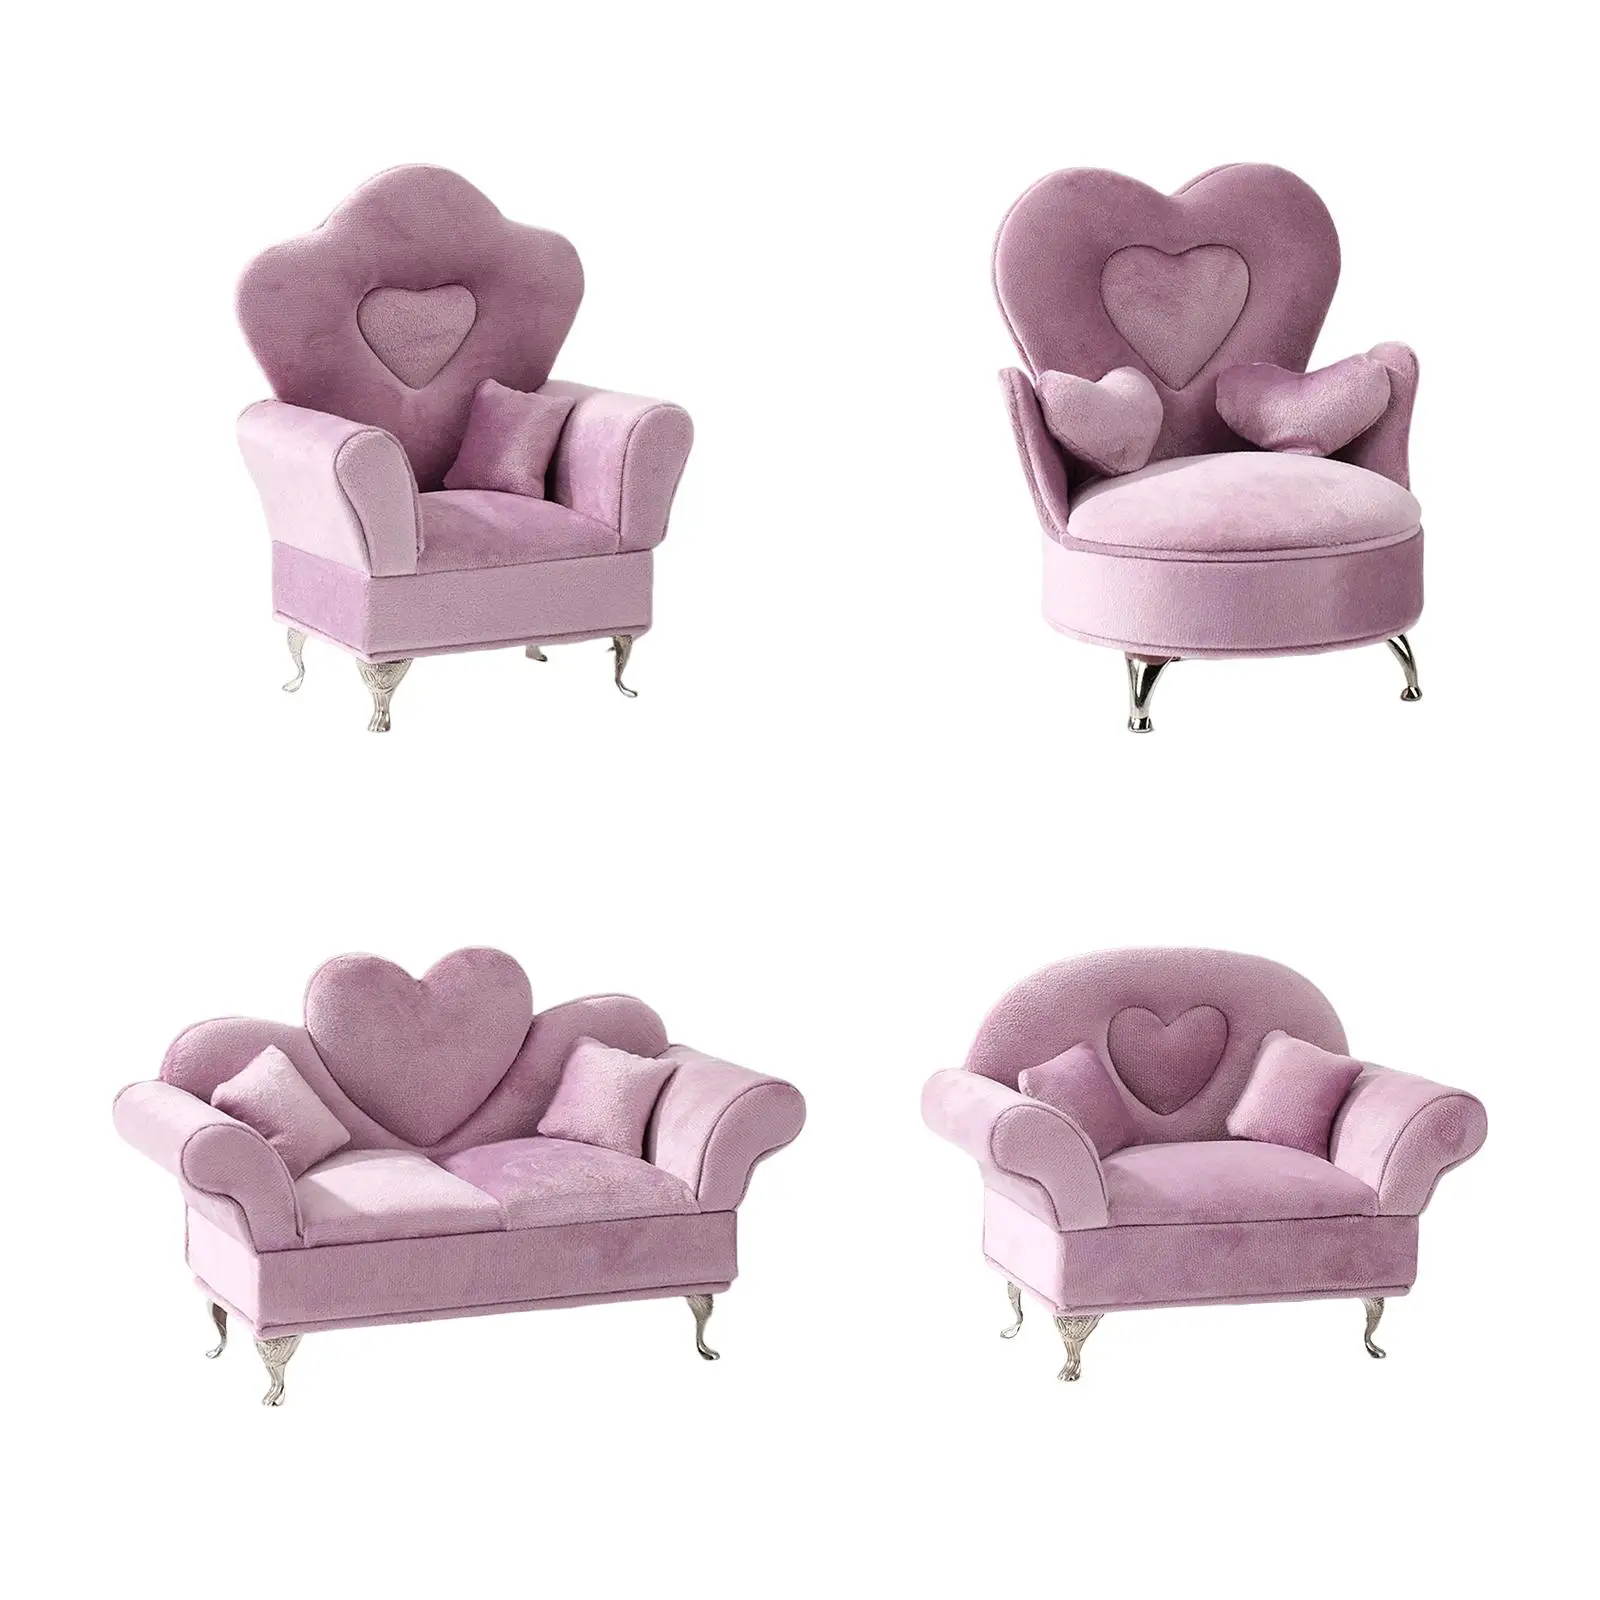 1:6 Sofa Elegant for 12inch Dollhouse Action Figures Furniture Accessories